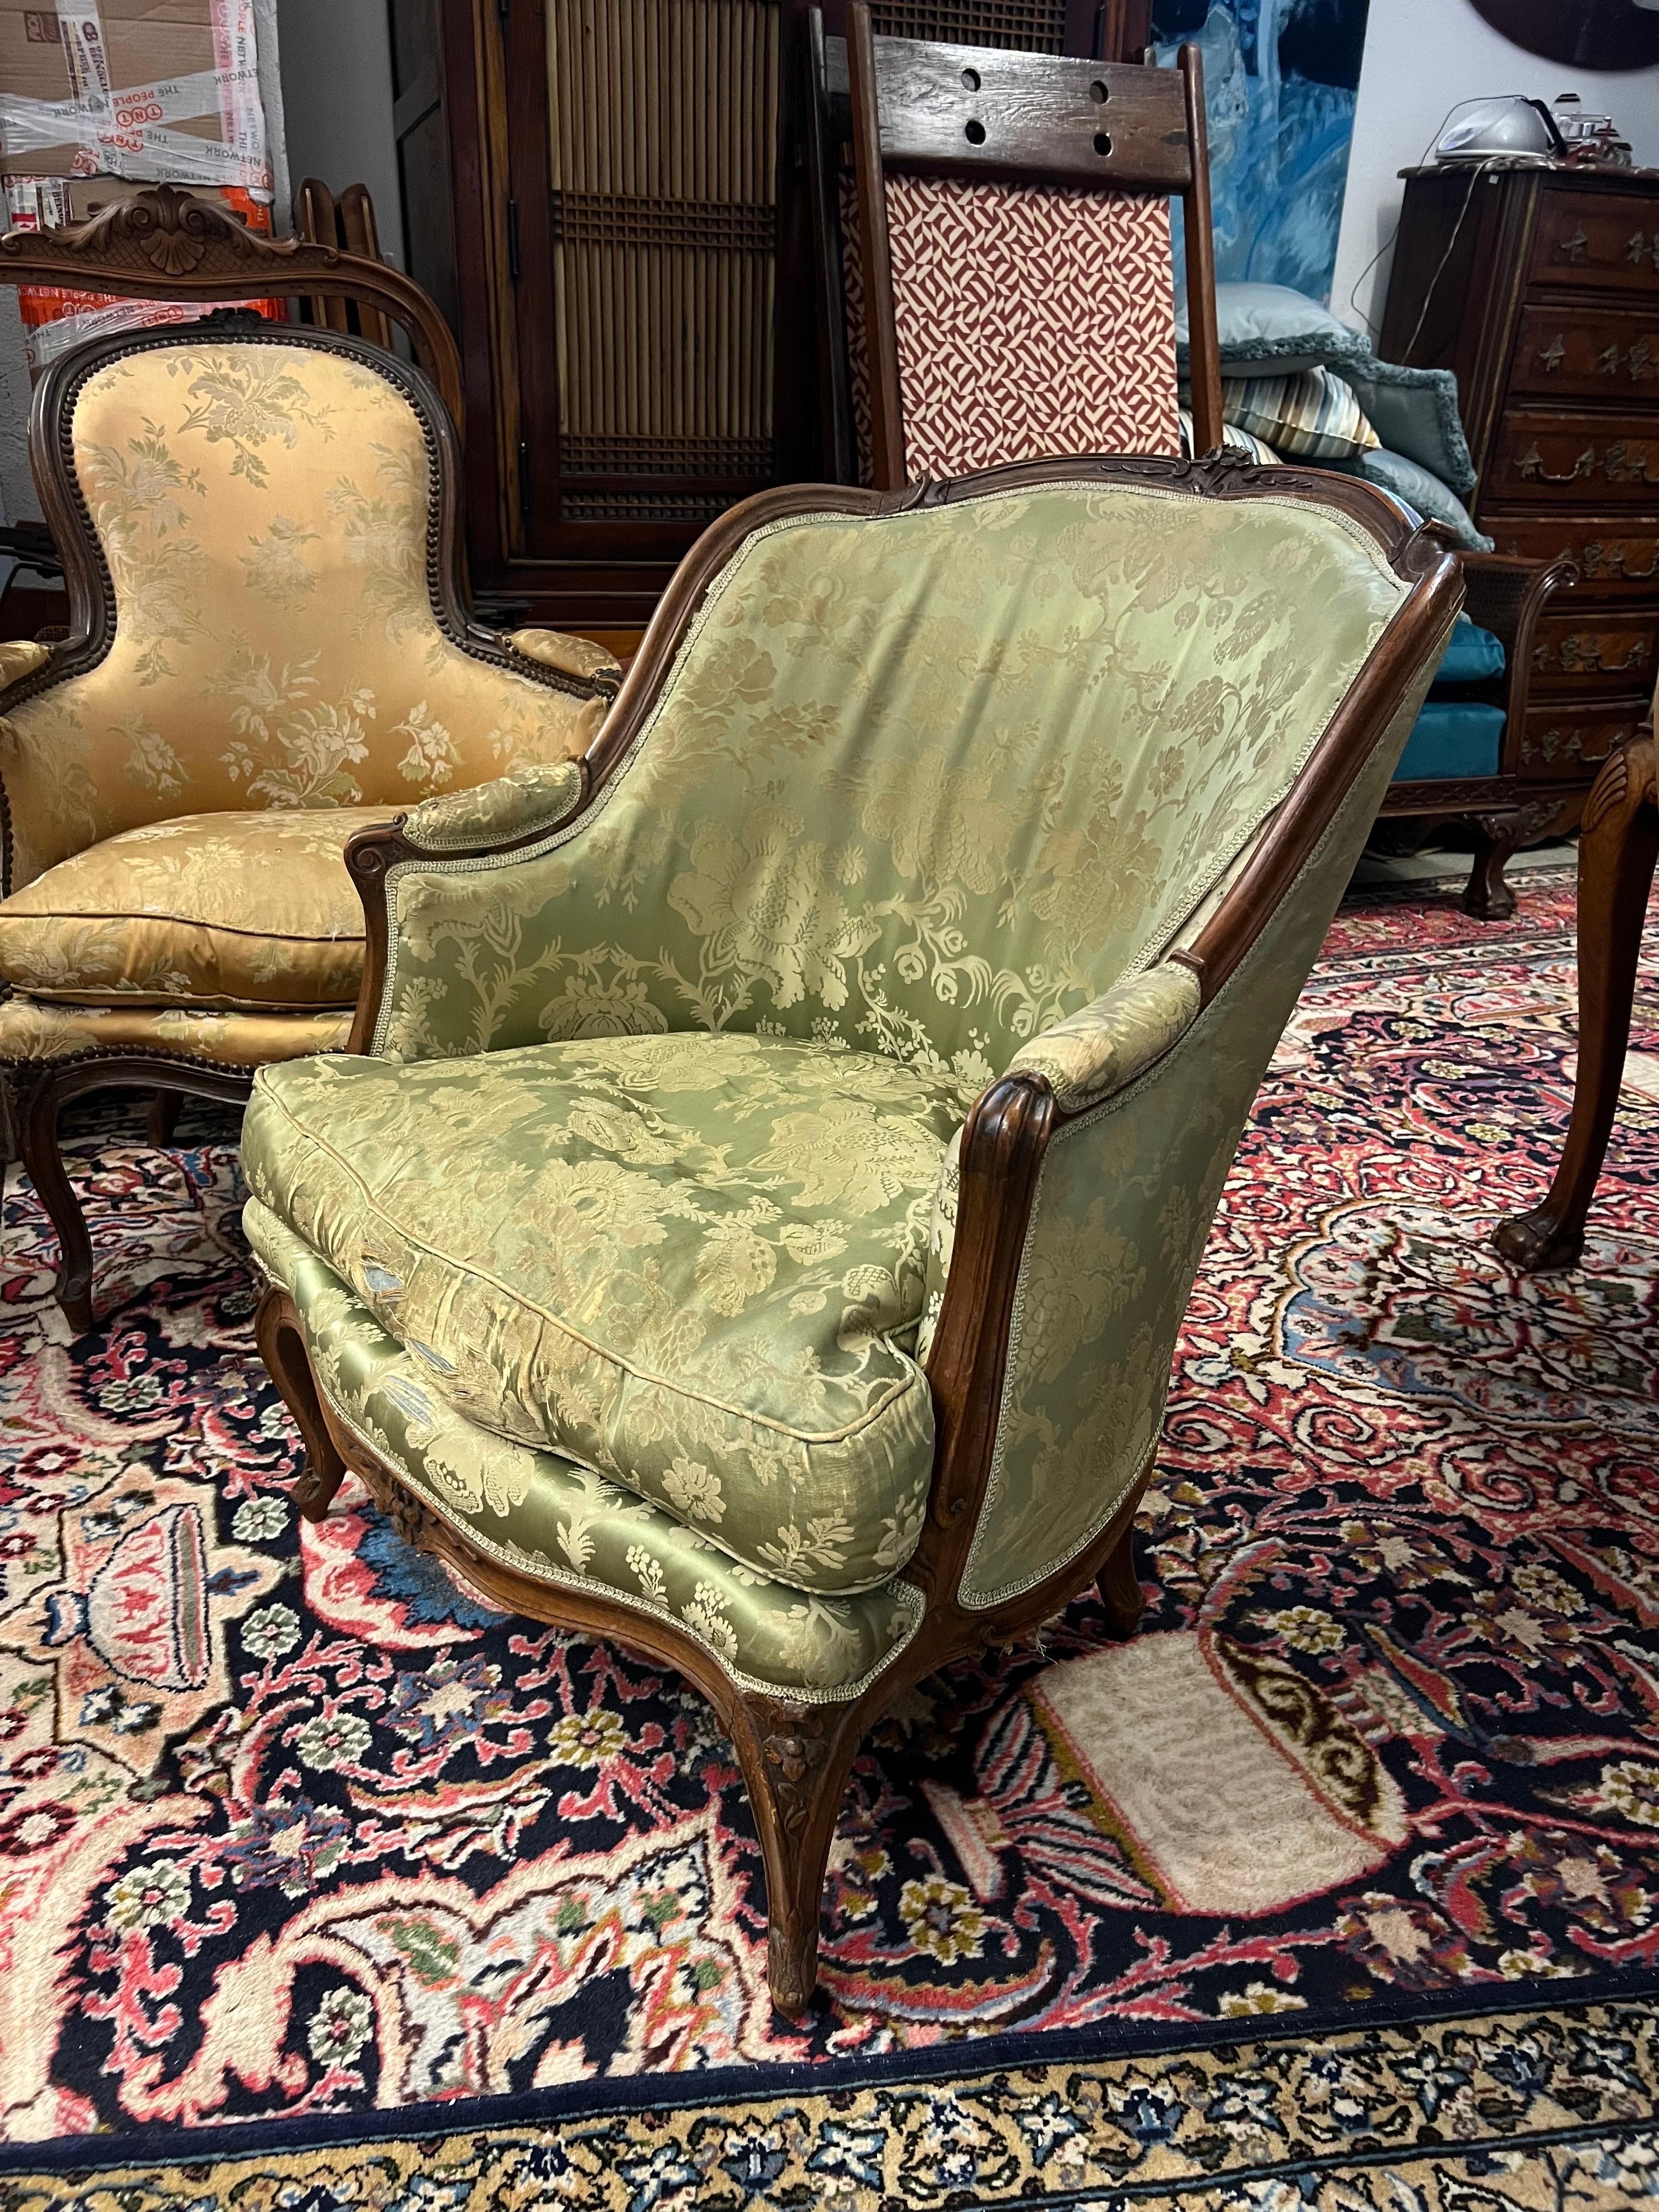 18th Century French duchesse part Louis XV period in hand molded and carved walnut frame steel wearing an original upholstery.
Good authentic condition of the frame but the upholstery needs to be changed.
France, circa 1750